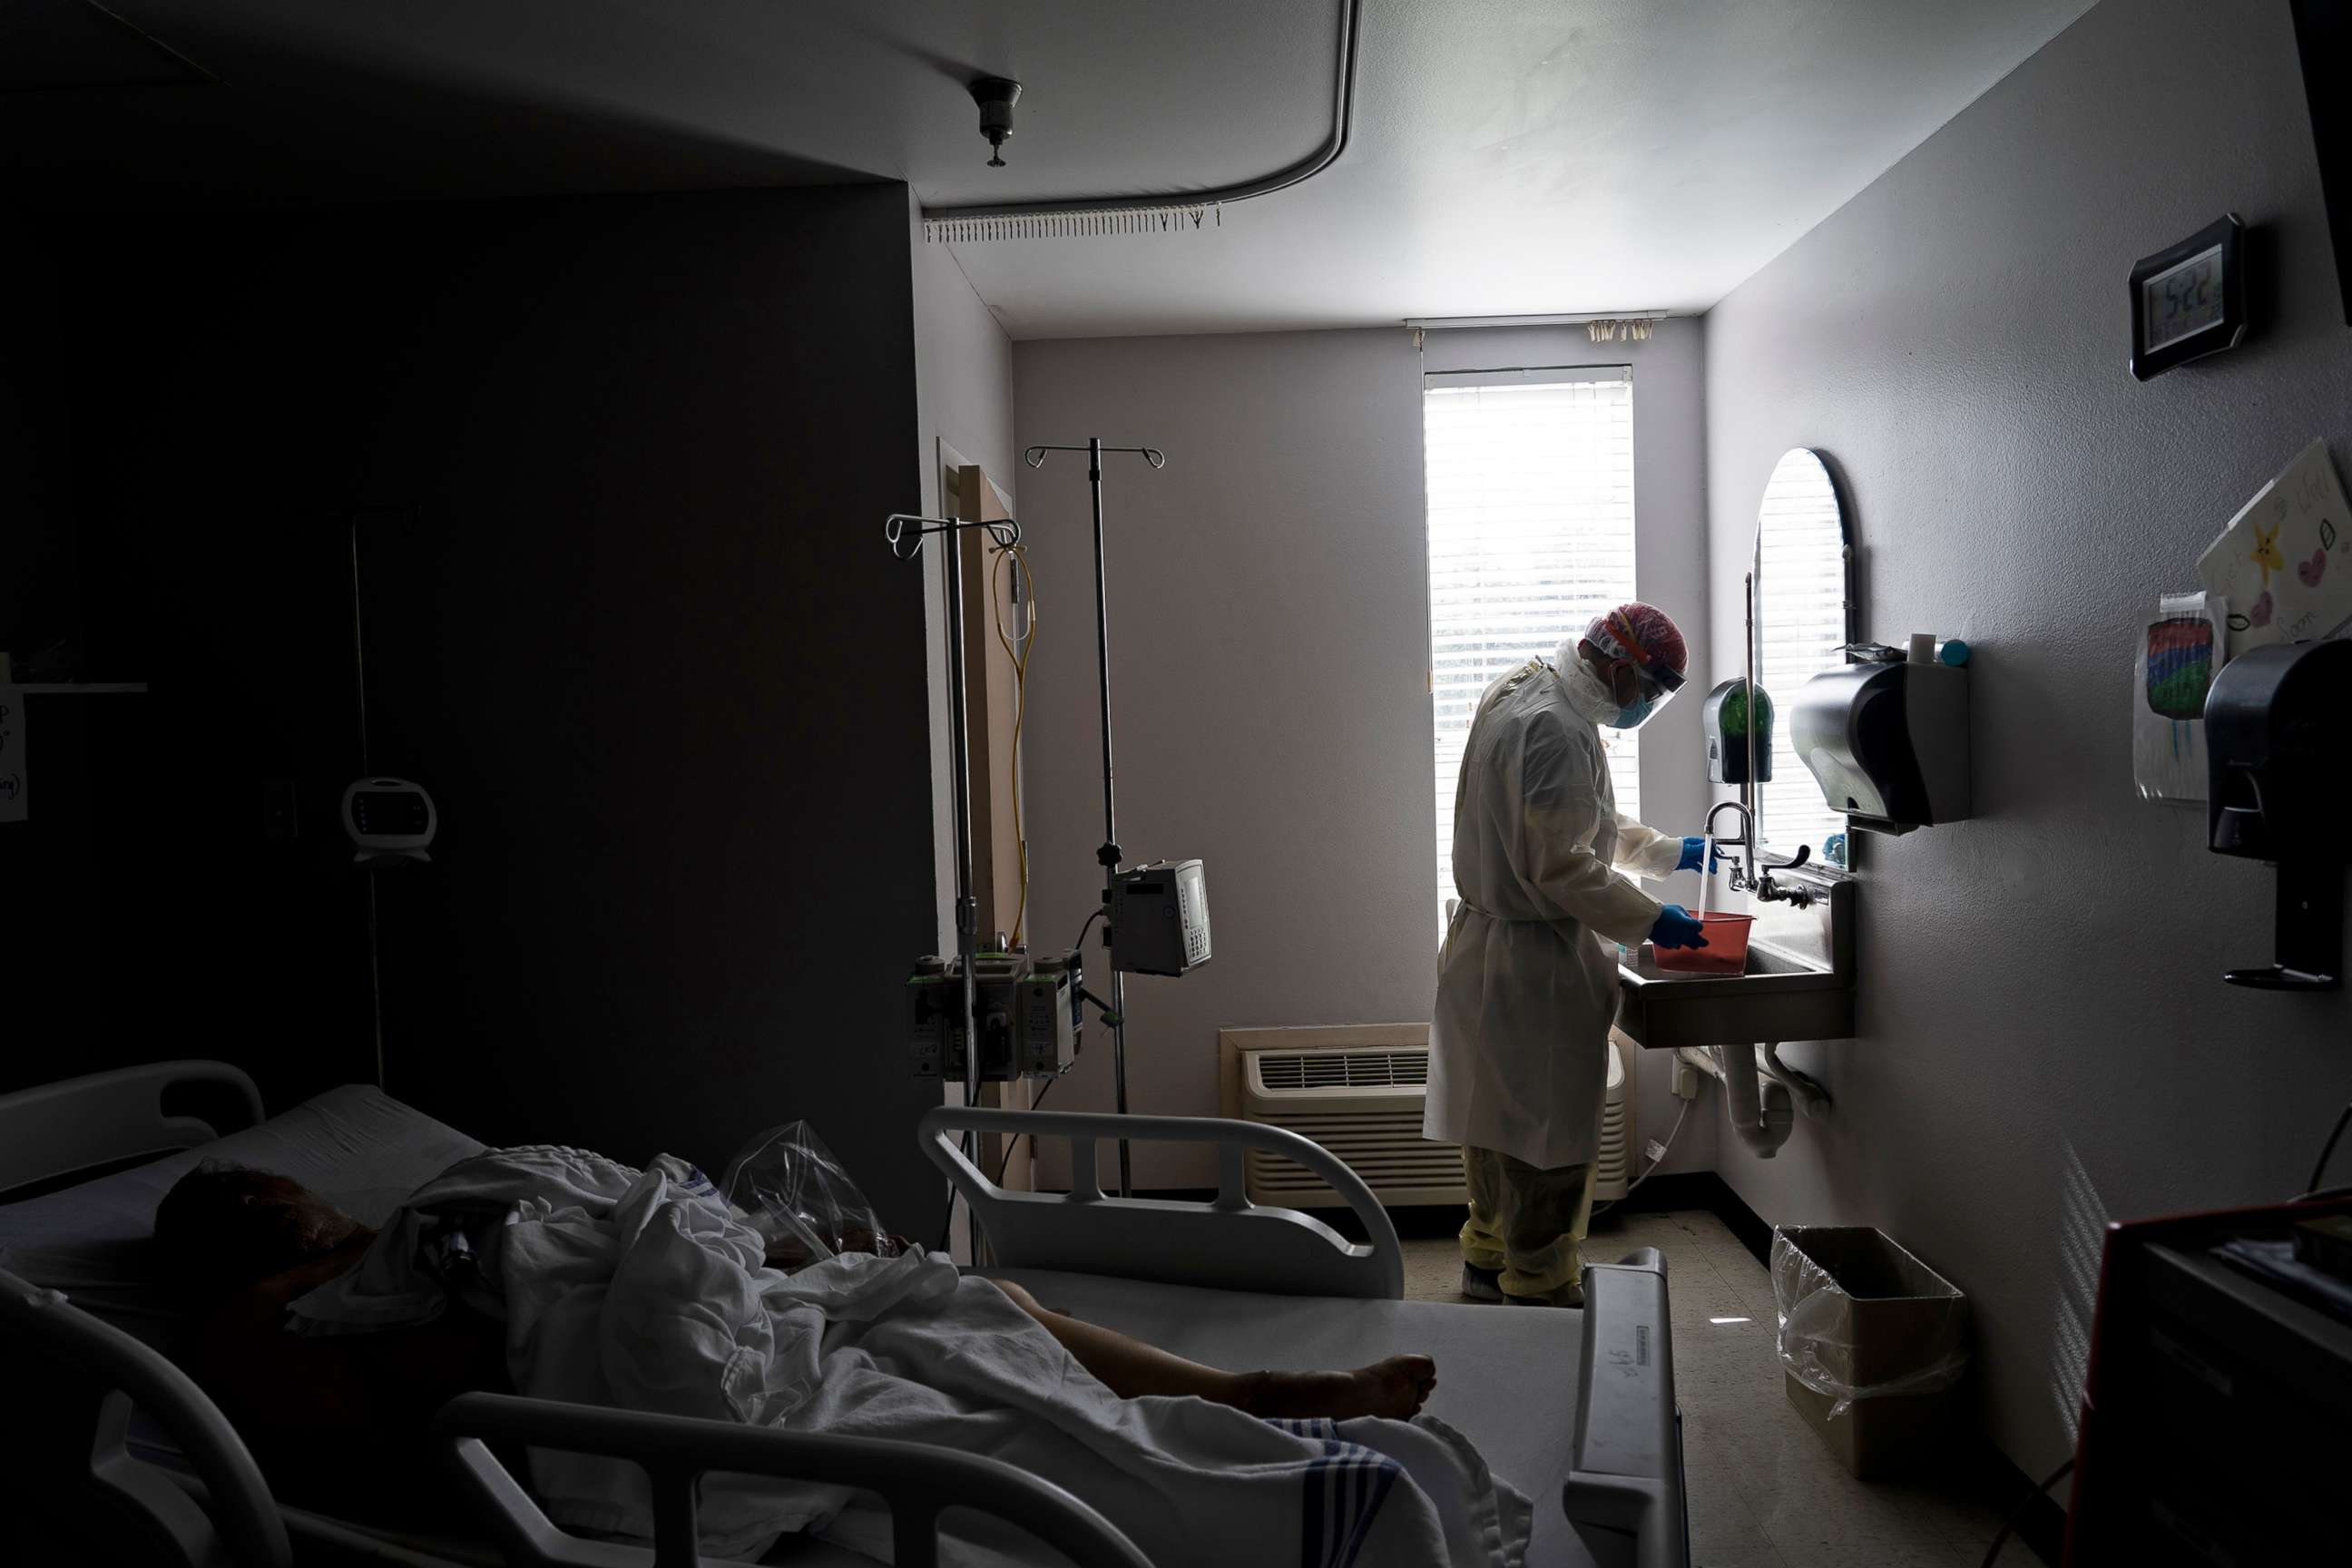 PHOTO: A member of the medical staff wearing full PPE prepares a disinfectant solution to wipe a deceased patient in the Covid-19 intensive care unit in Houston, June 30, 2020.